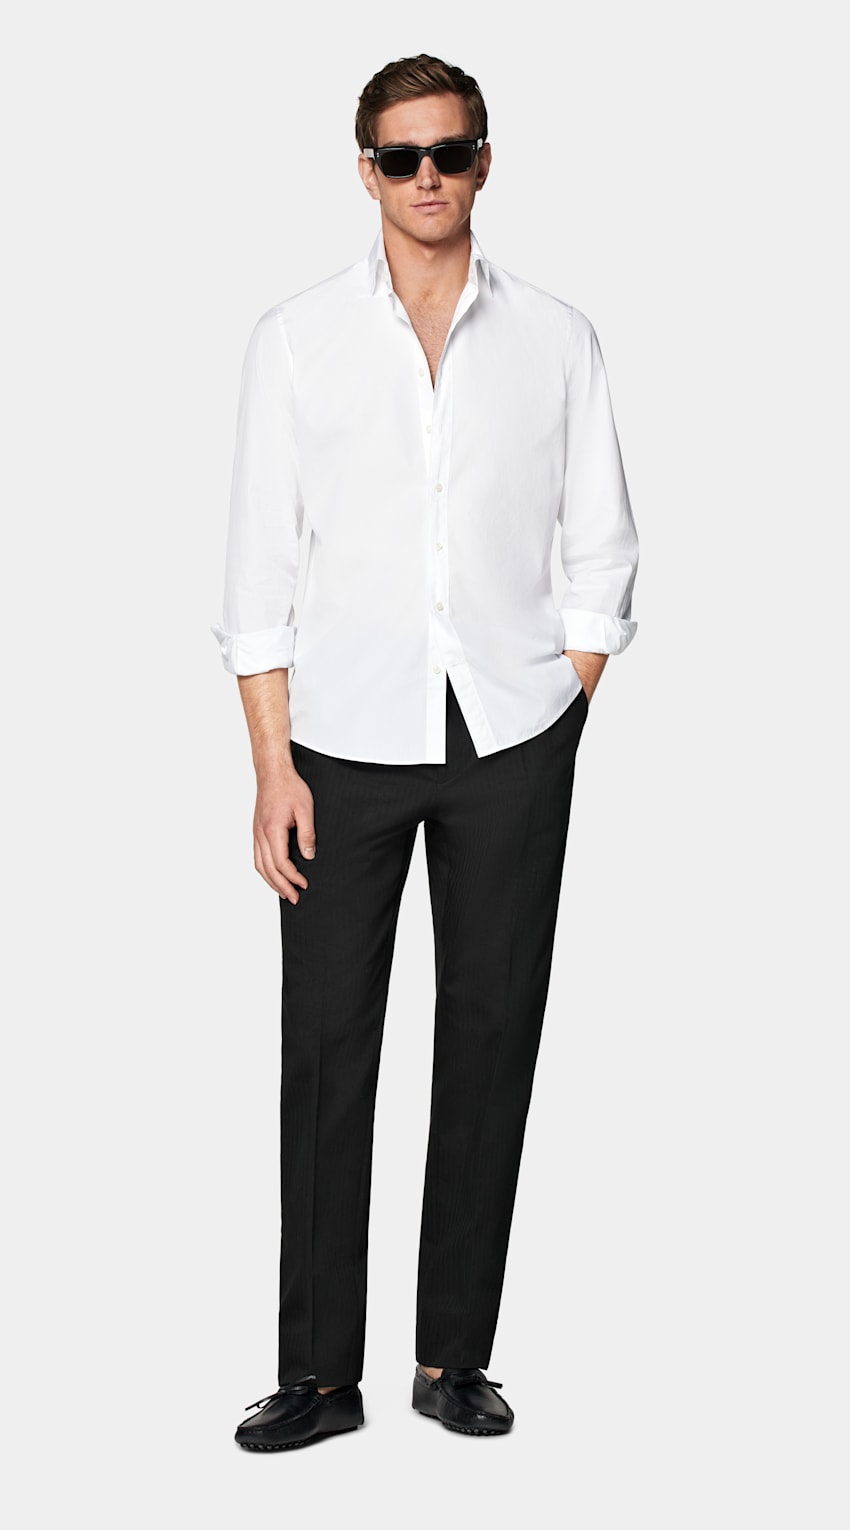 SUITSUPPLY Egyptian Cotton by Testa Spa, Italy White Poplin Extra Slim Fit Shirt